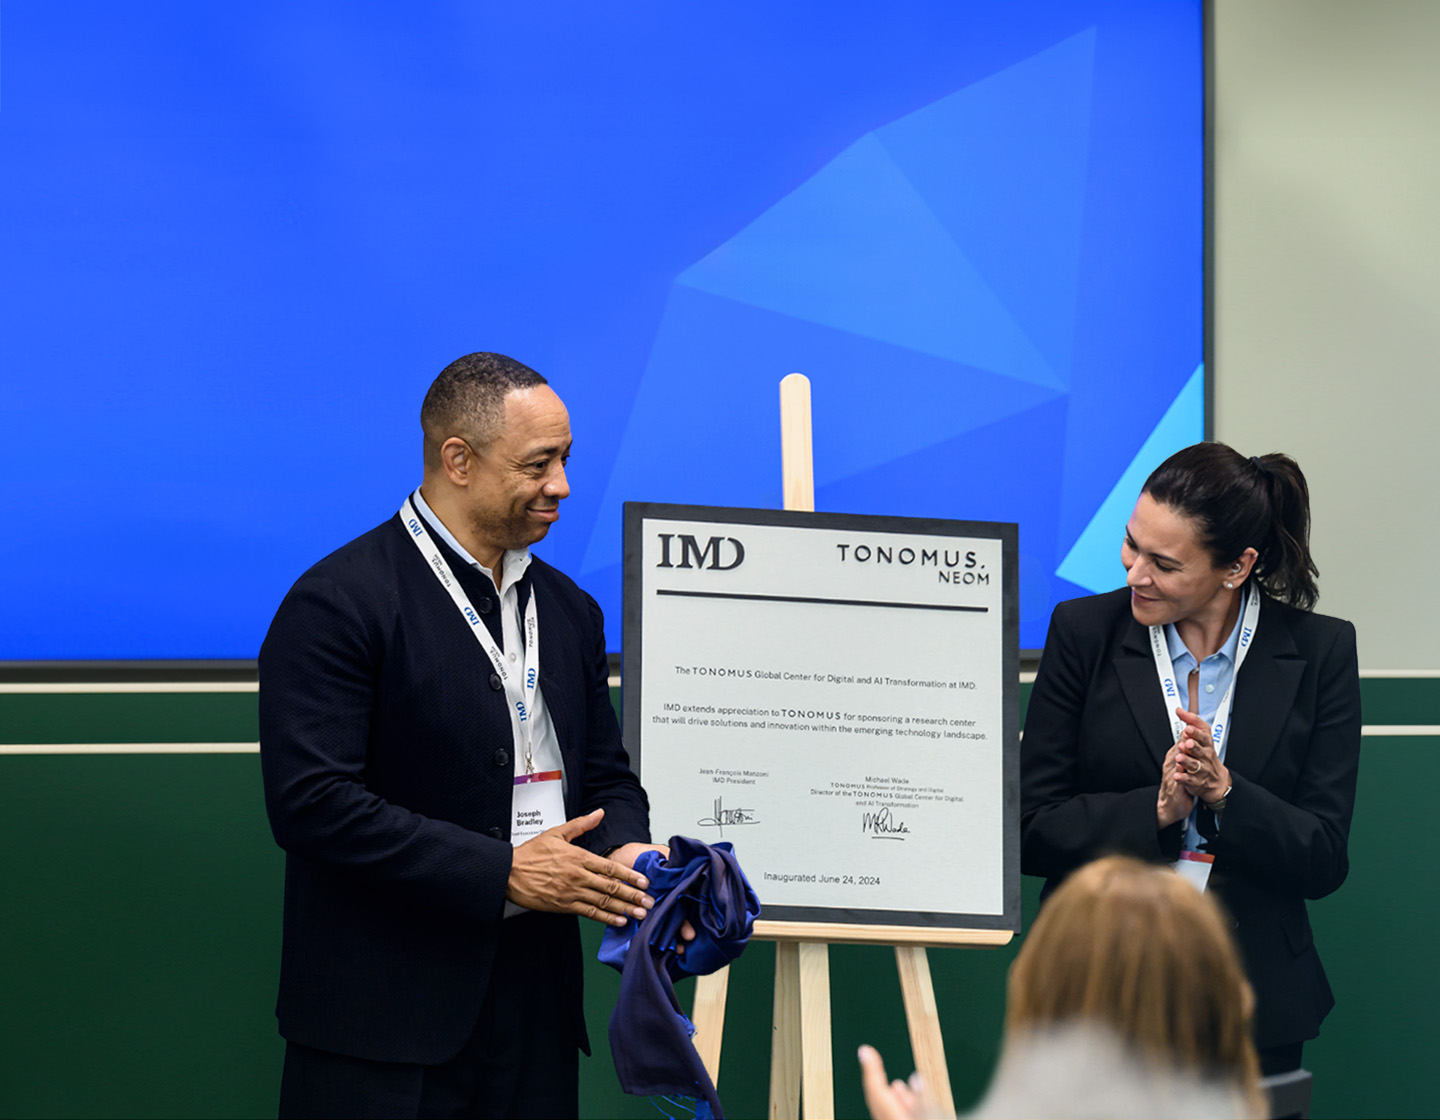 IMD accelerates cutting-edge research and innovation in digital and AI transformation with funding from TONOMUS